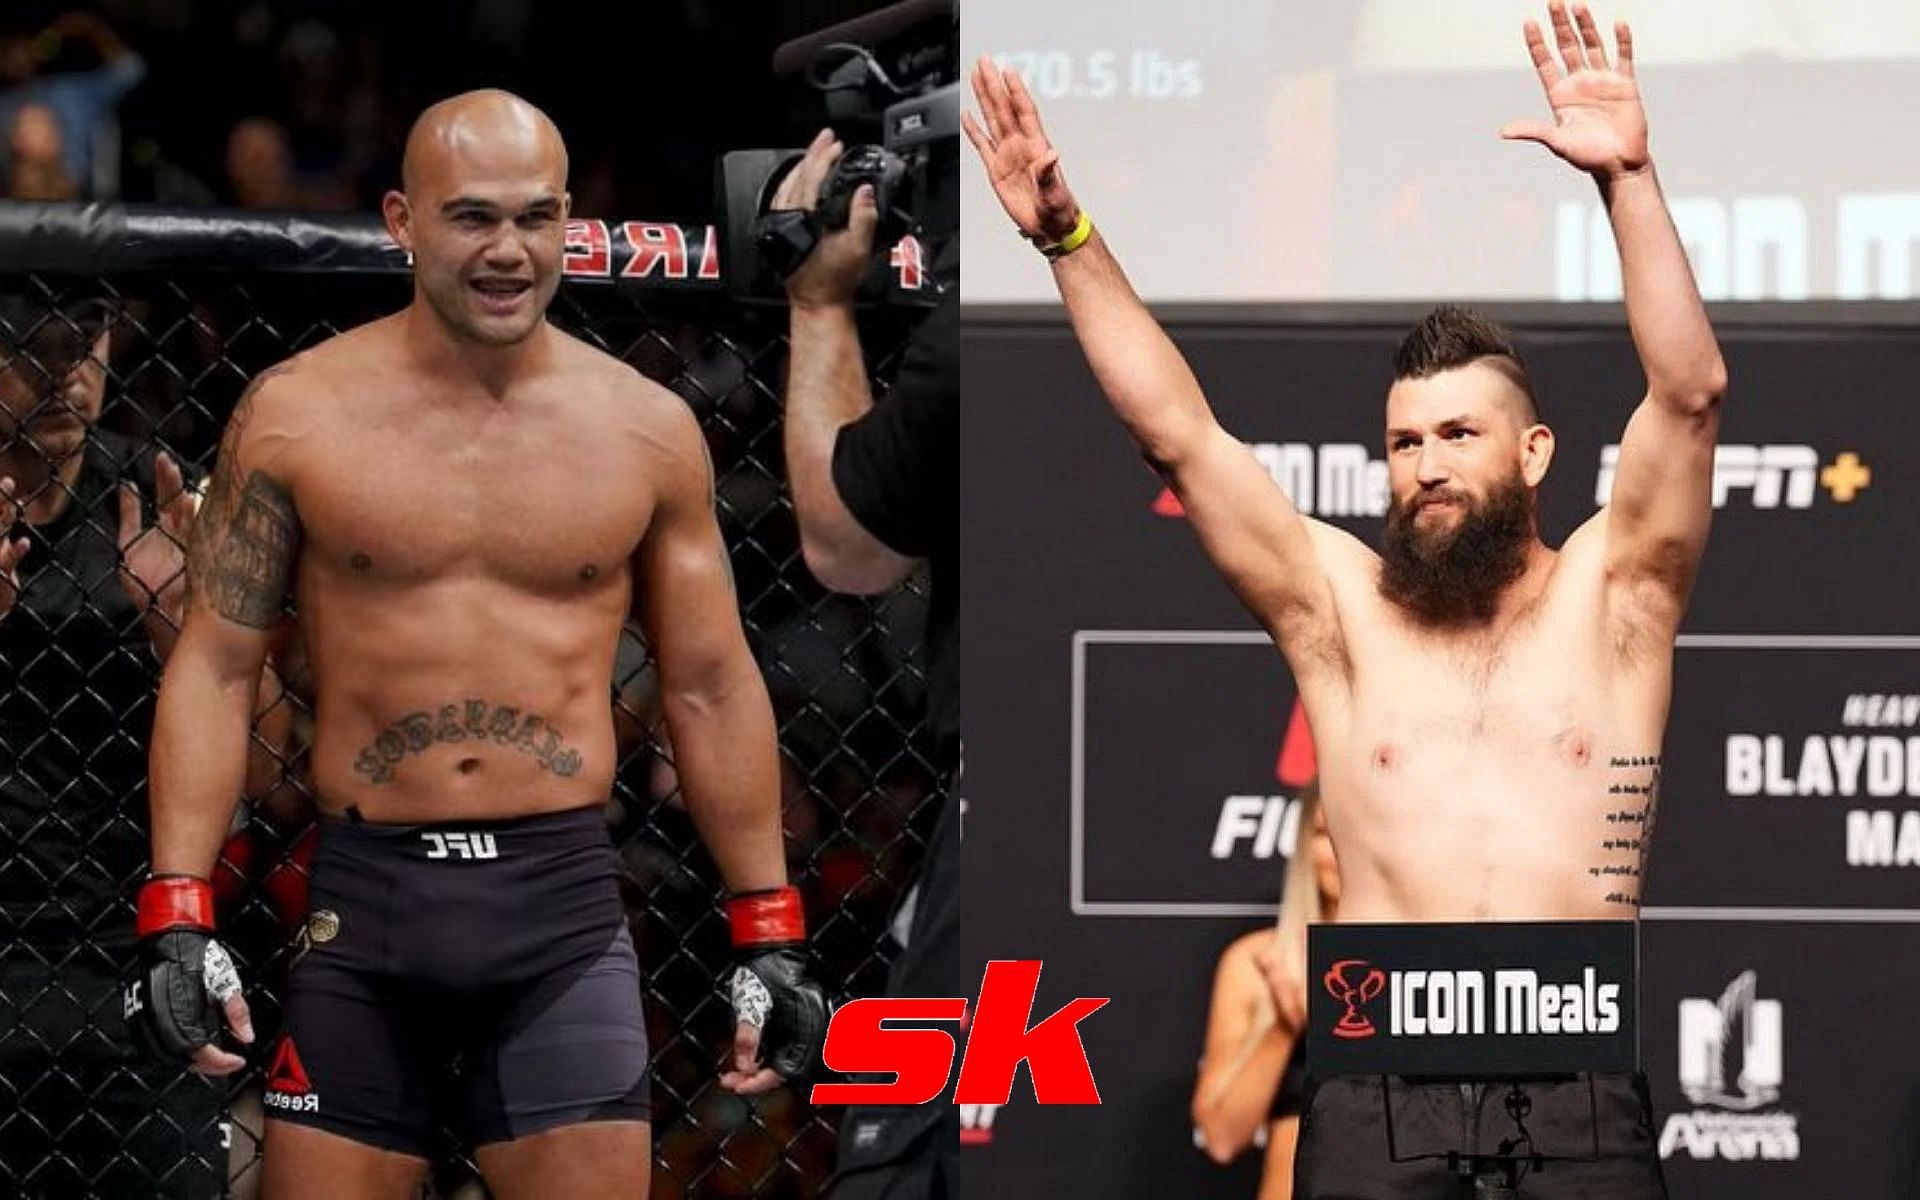 Robbie Lawler (left) and Bryan Barberena (right) [Left image via Getty, right image via @bryan_barberena on Instagram]